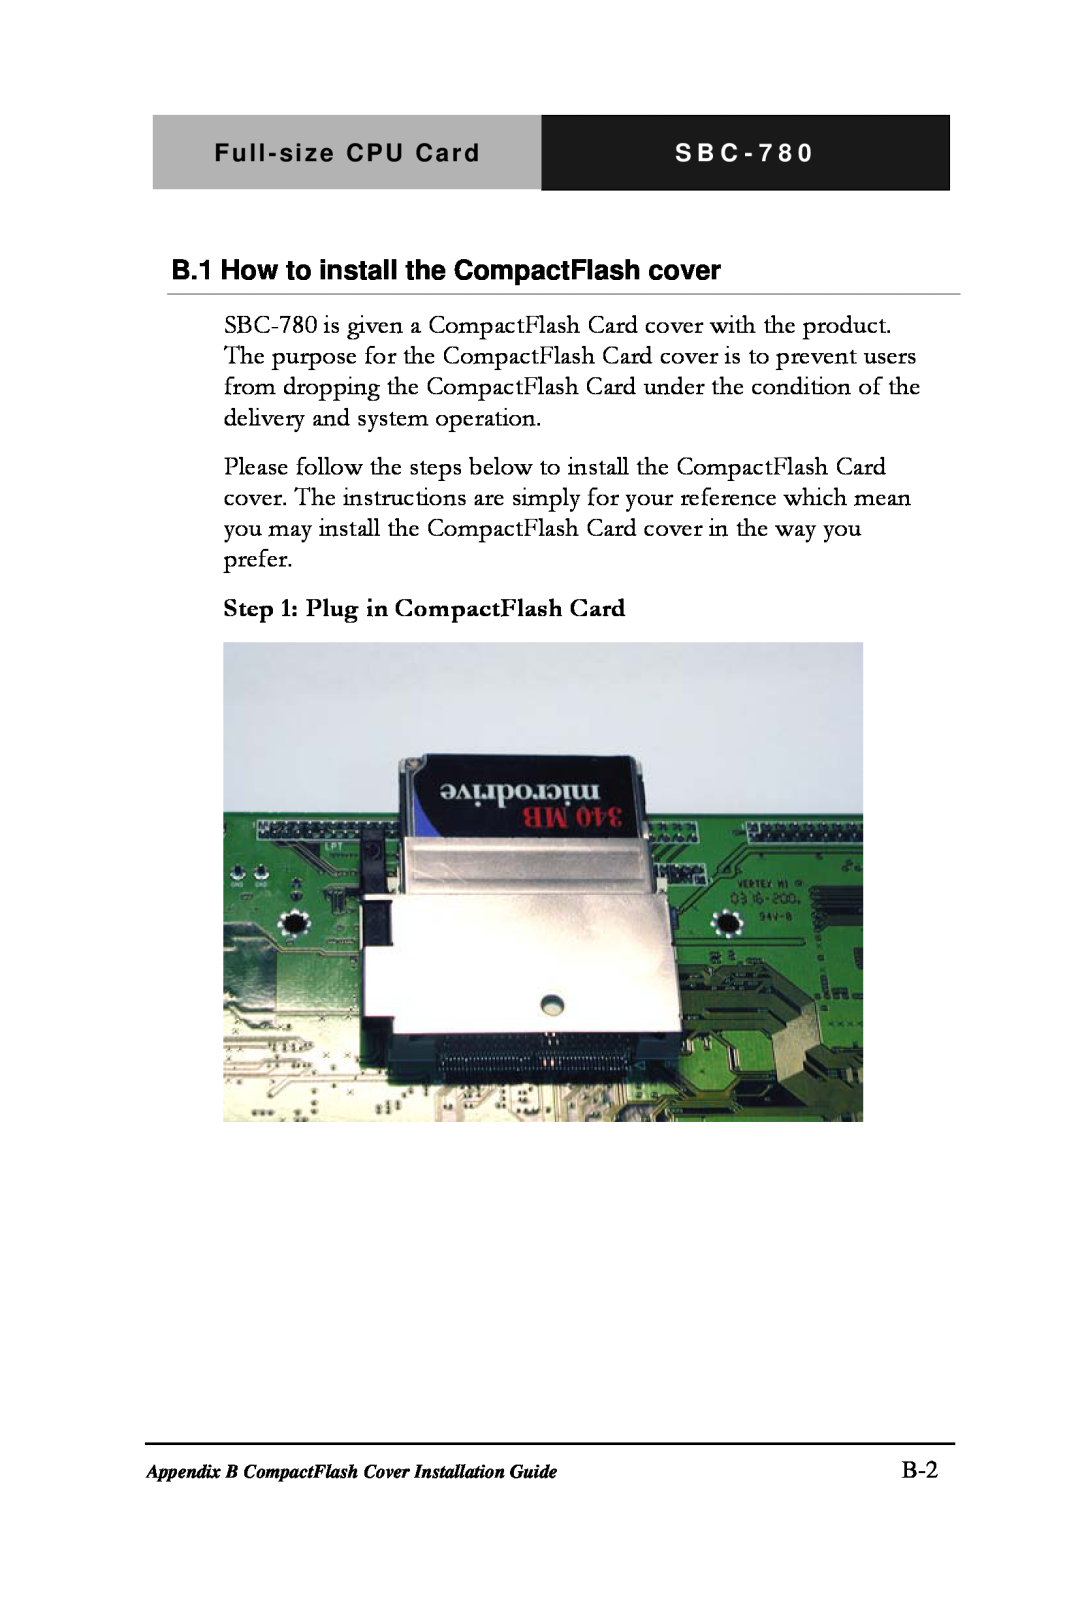 Intel SBC-780 manual B.1 How to install the CompactFlash cover, Plug in CompactFlash Card 